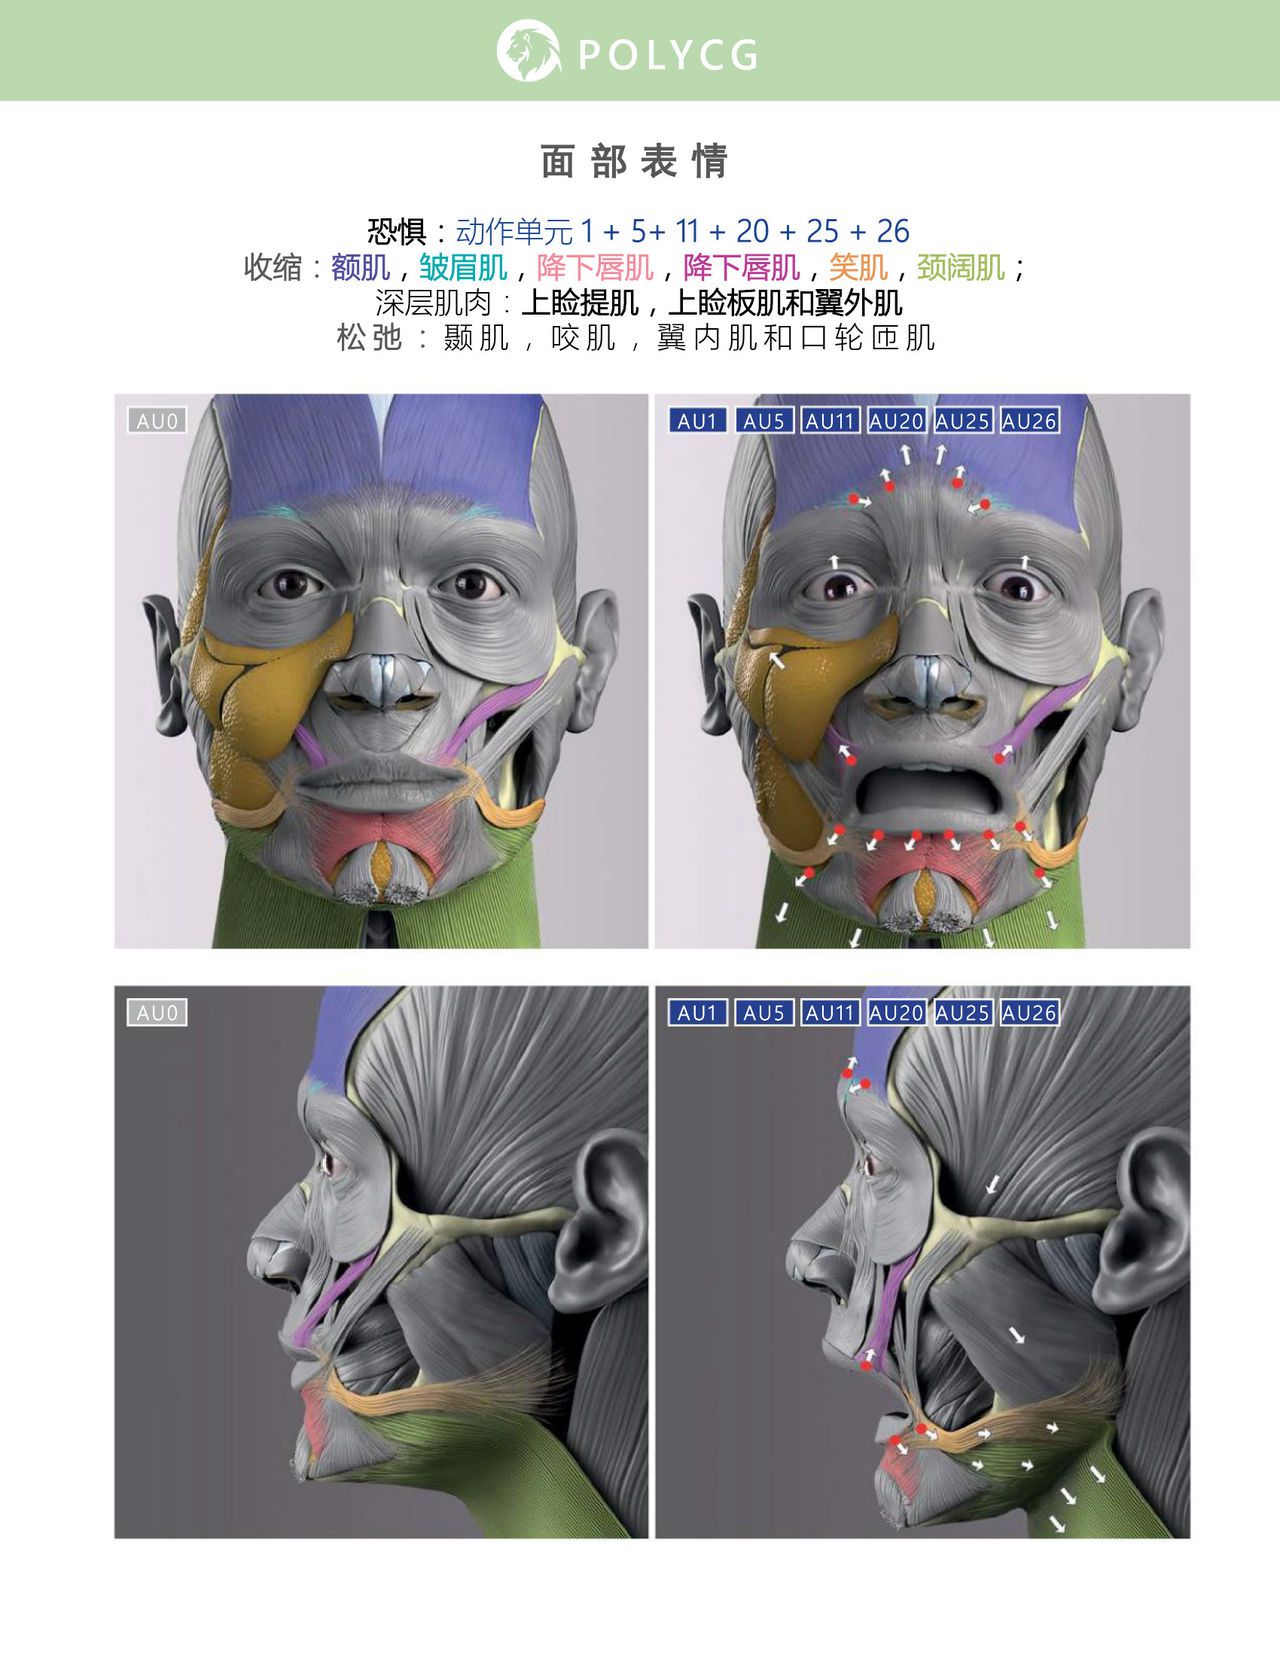 Uldis Zarins-Anatomy of Facial Expression-Exonicus [Chinese] 面部表情艺用解剖 [中文版] 165